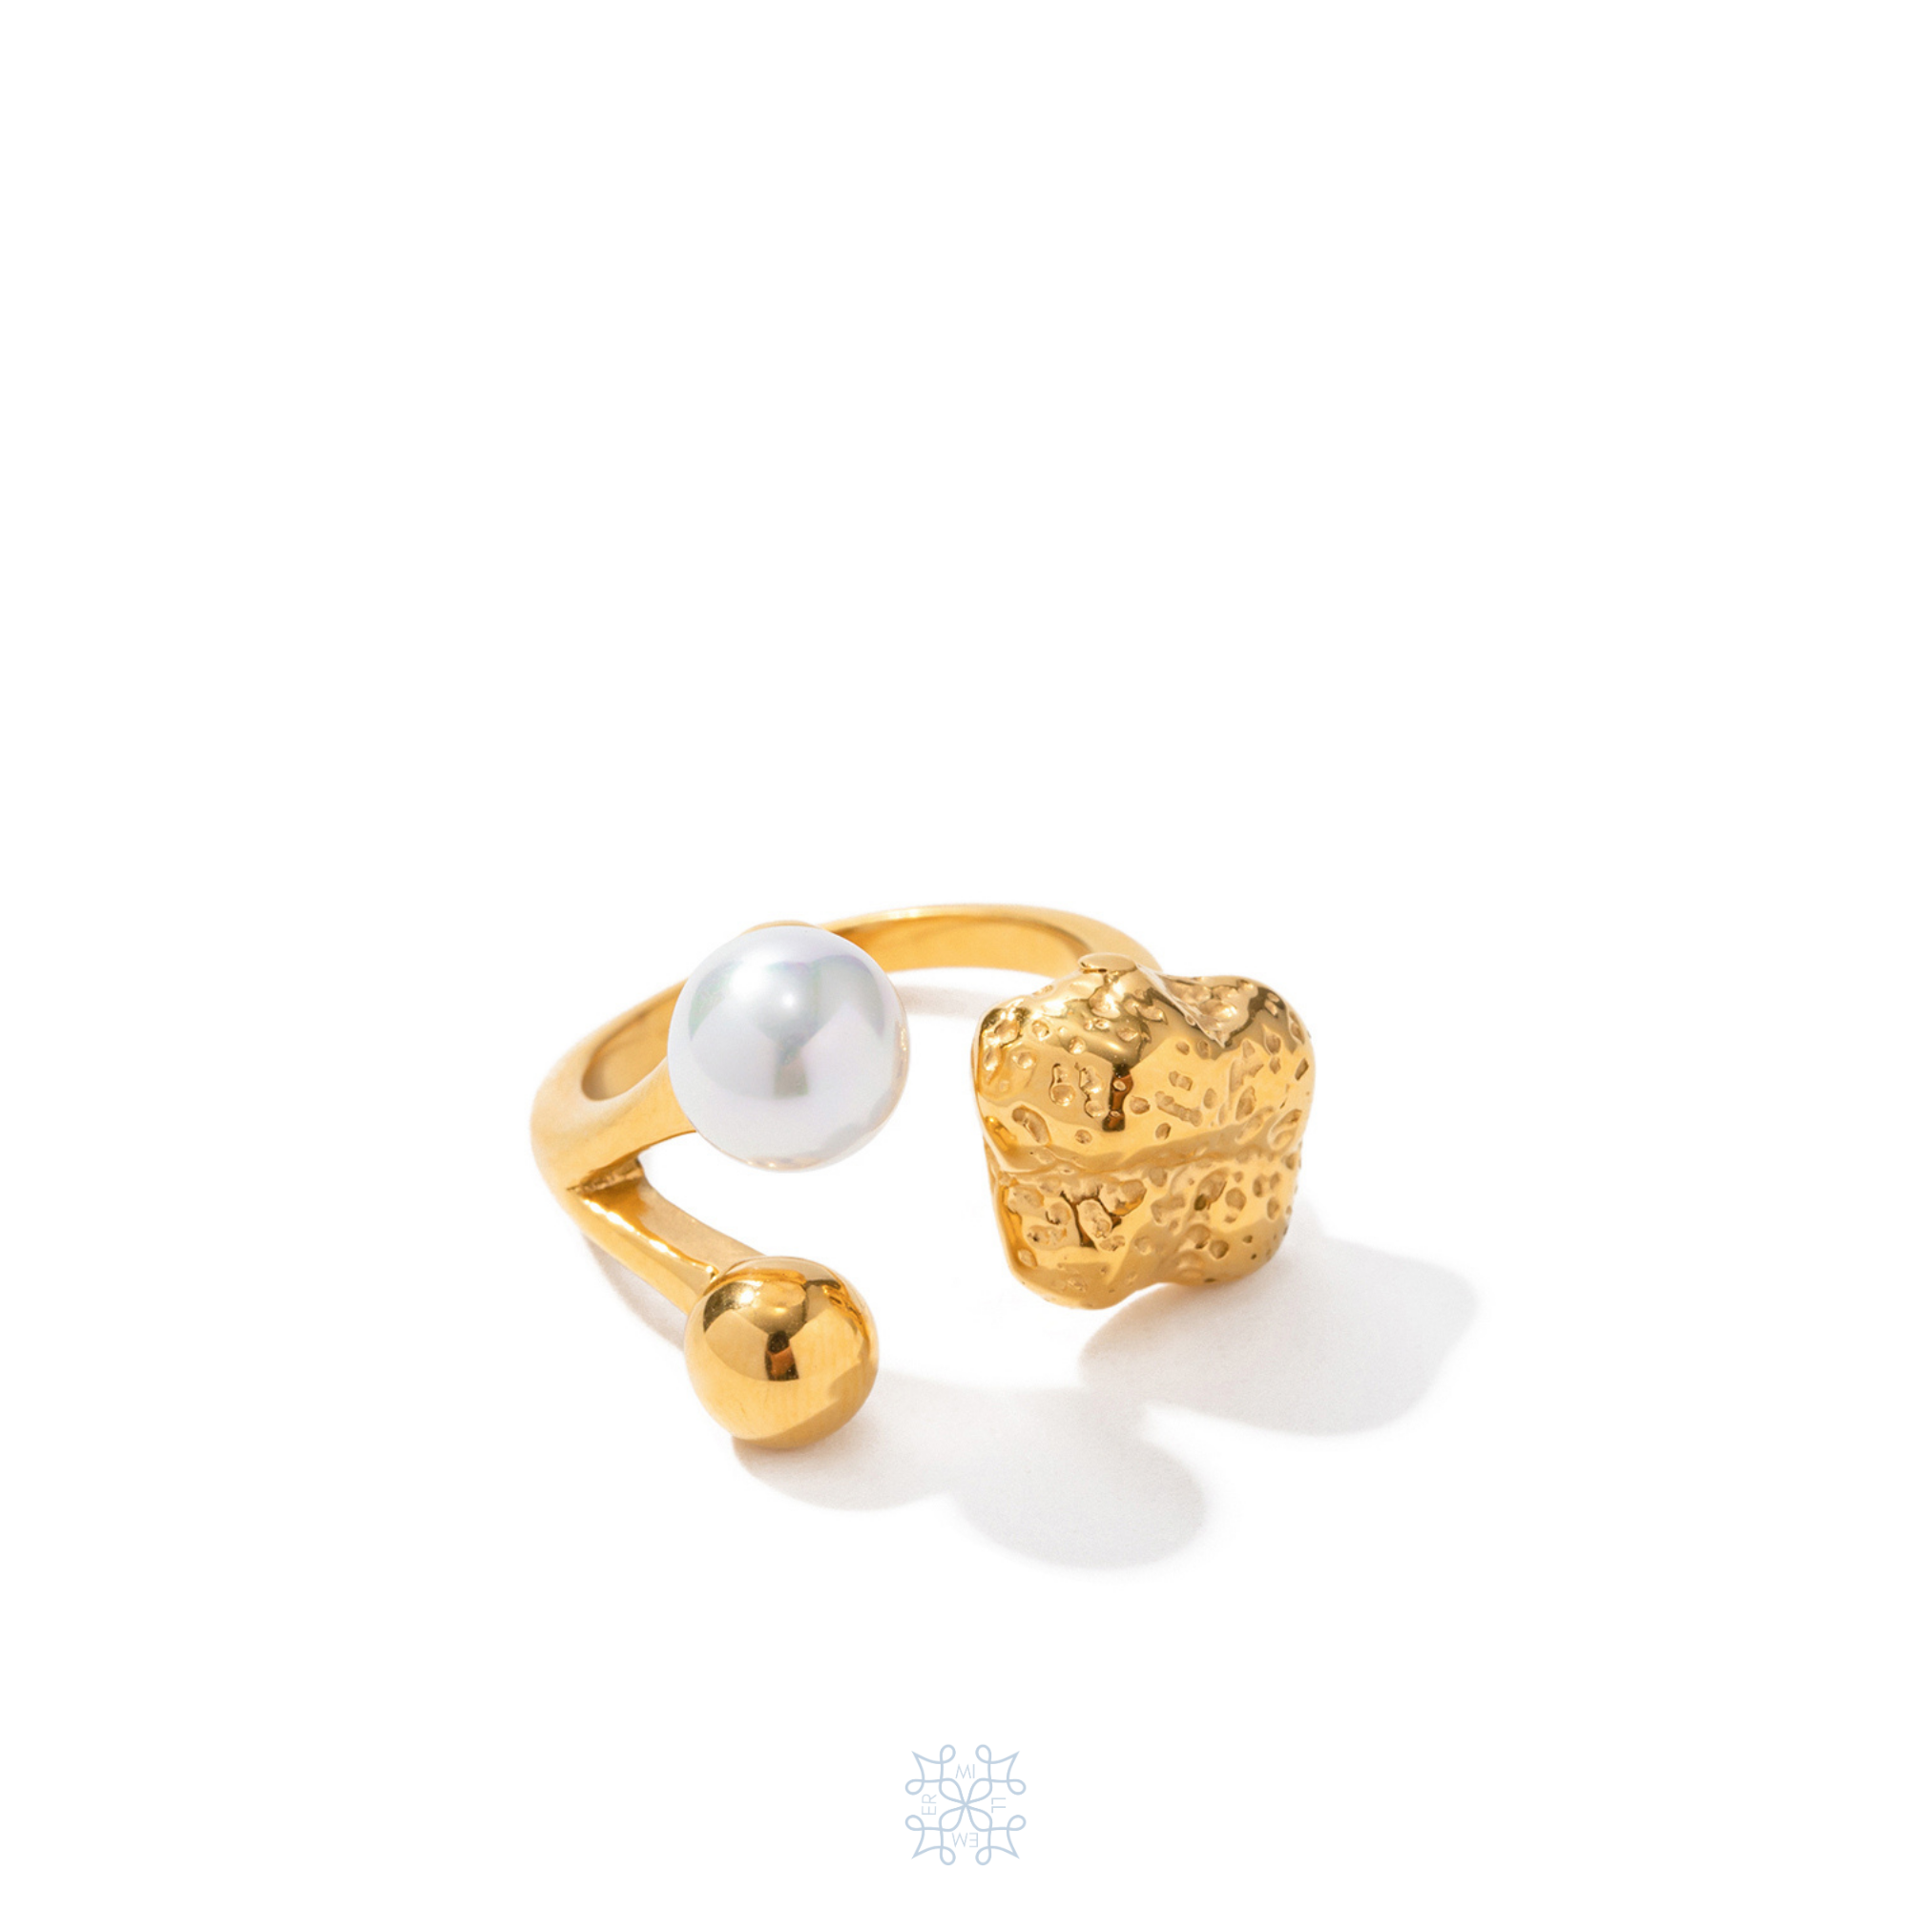 Folie pearl gold ring. Adjustable gold ring with a pearl on top of it. An irregular shape and texture.